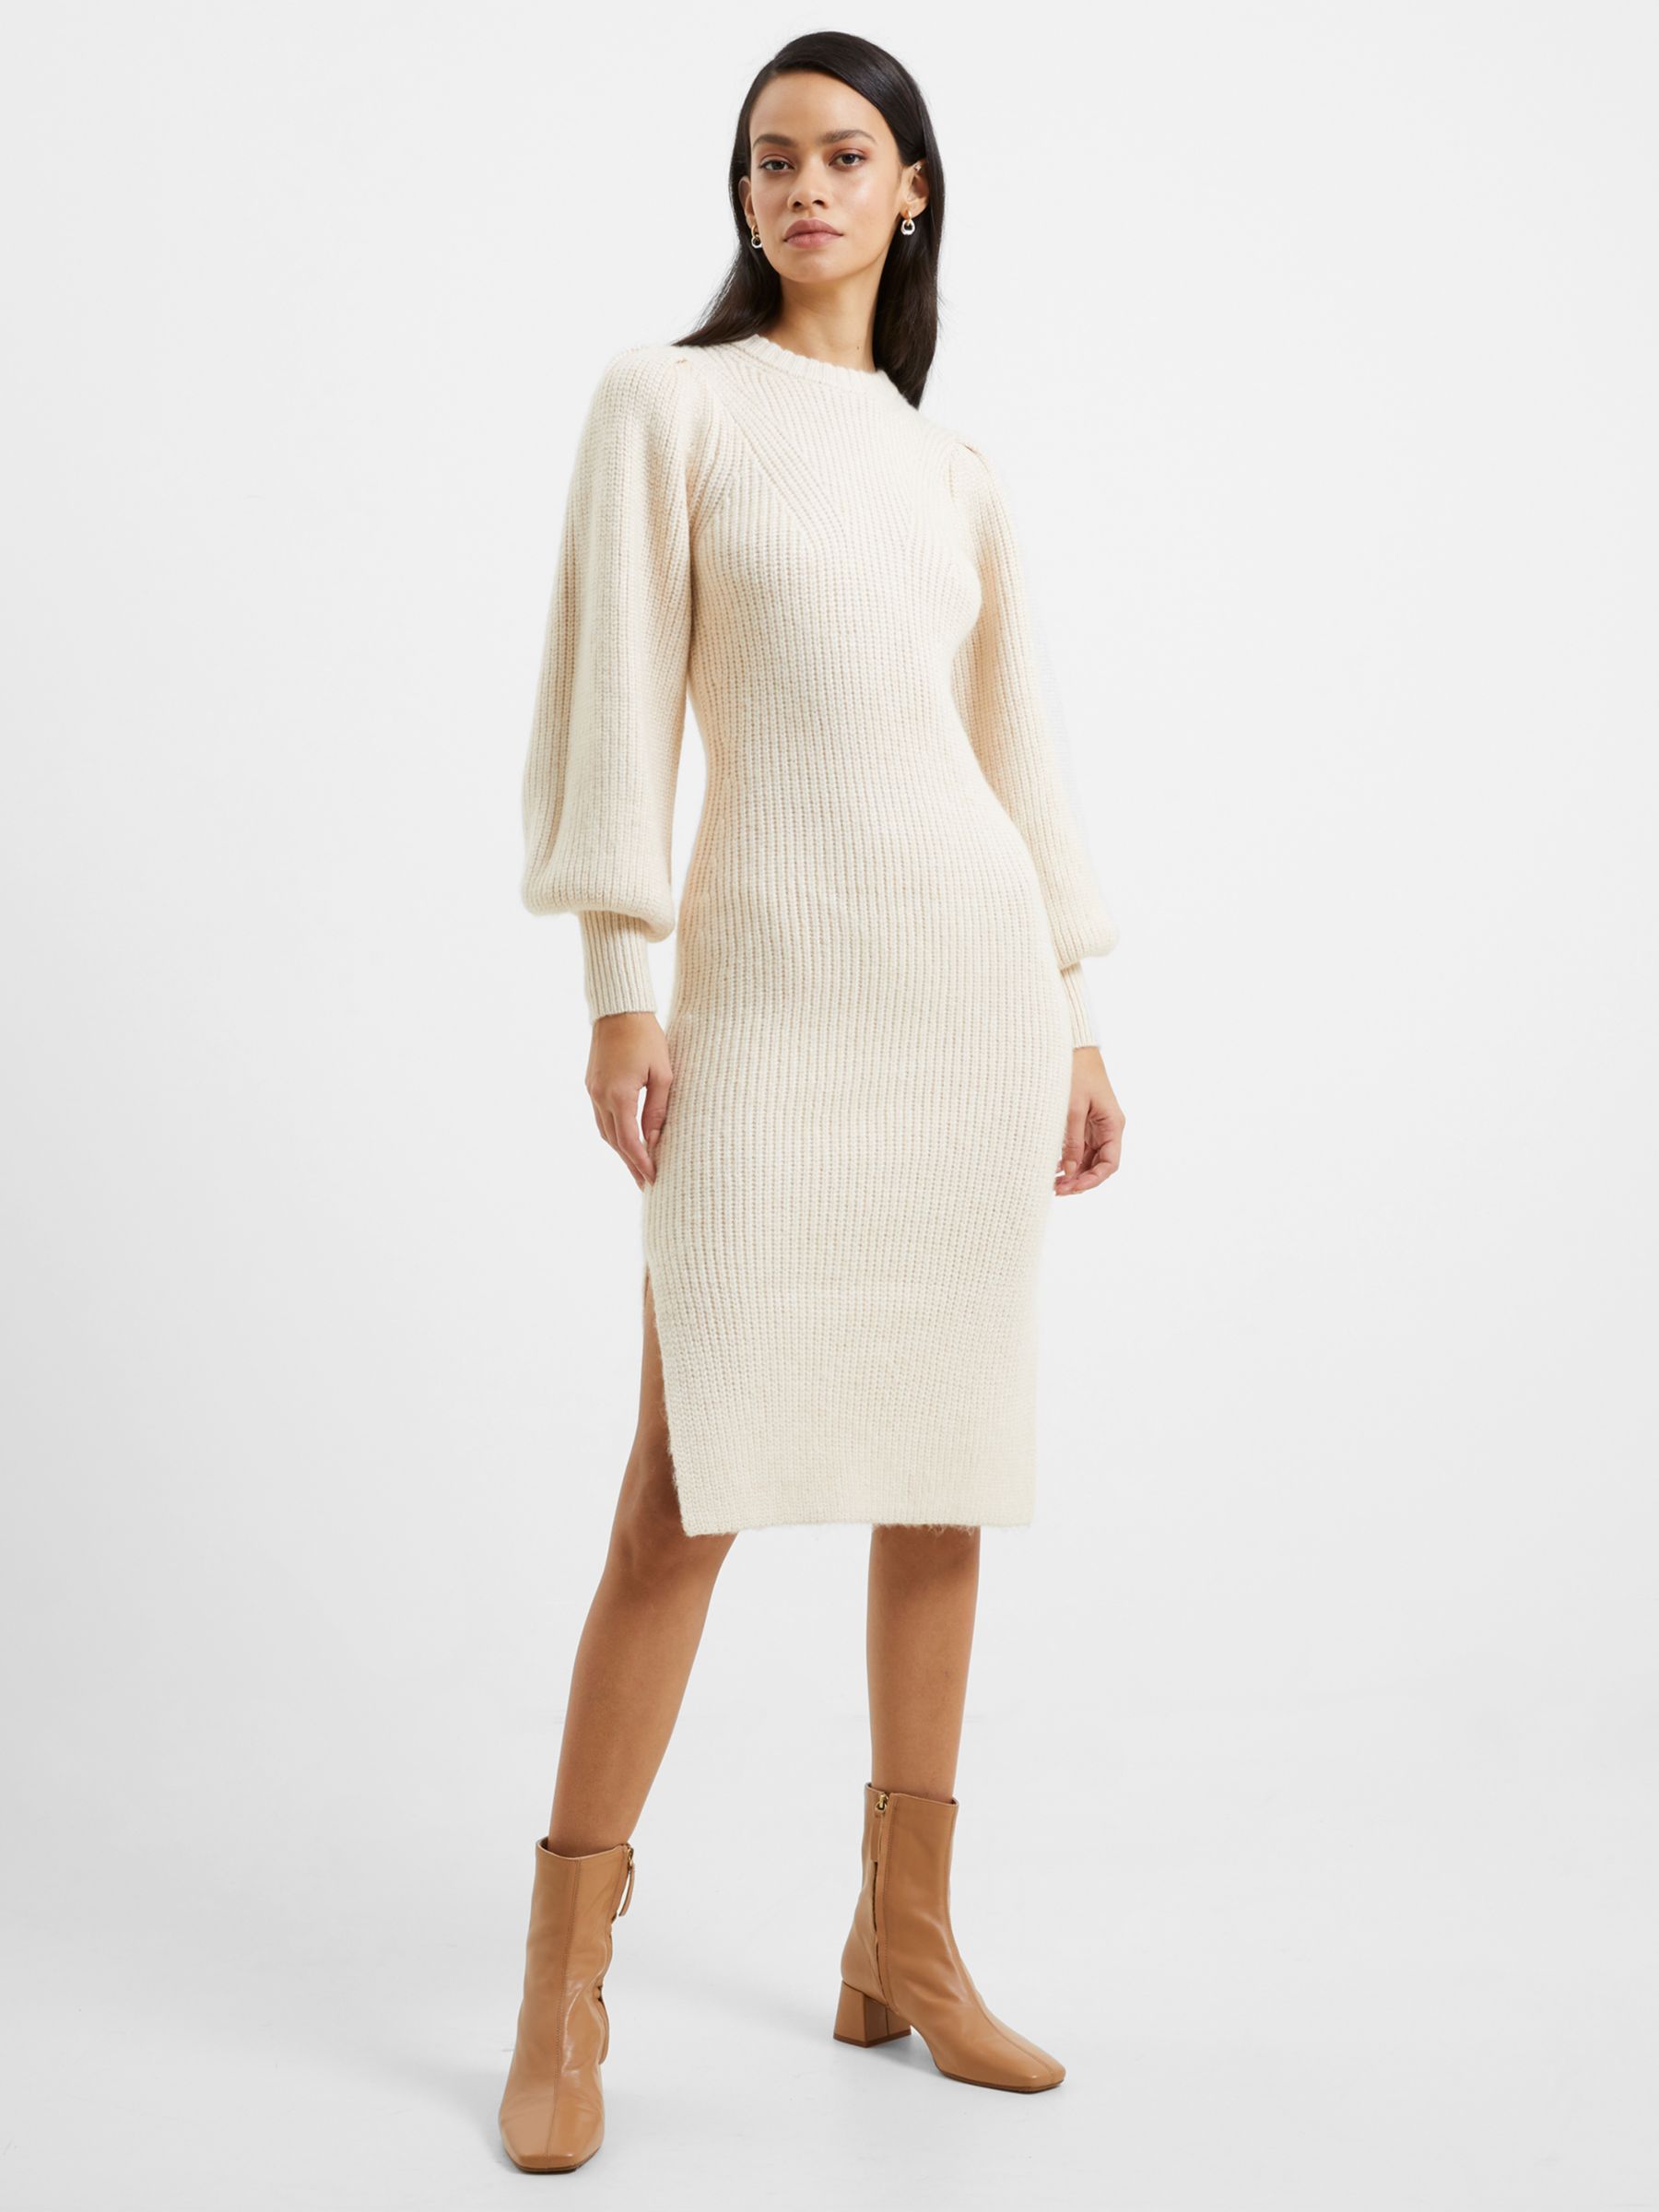 French Connection Kessy Puff Sleeve Dress, Oatmeal, M